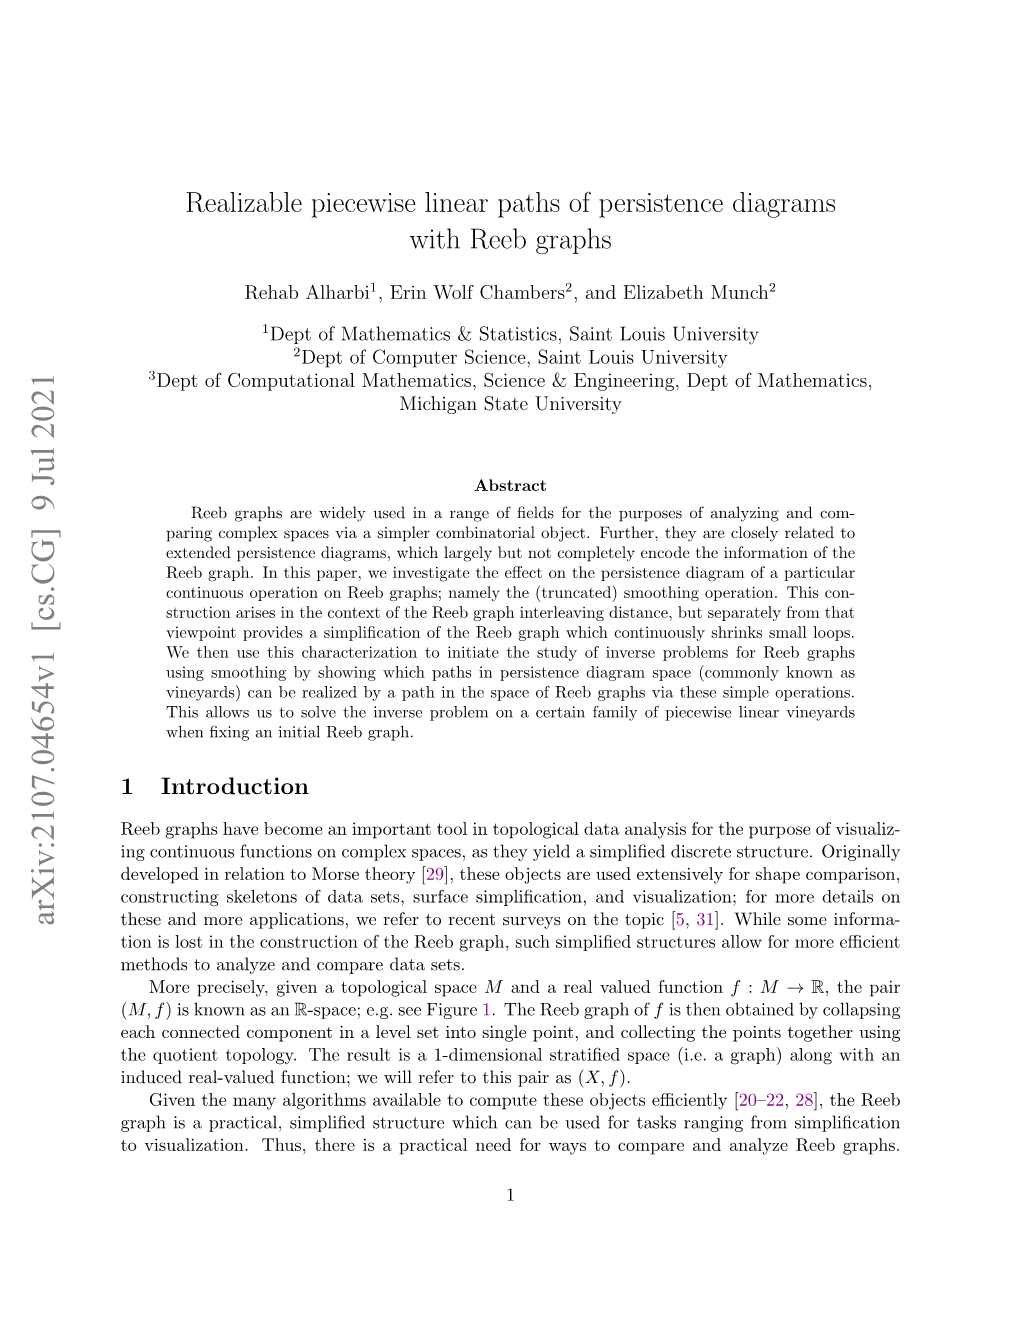 Realizable Piecewise Linear Paths of Persistence Diagrams with Reeb Graphs